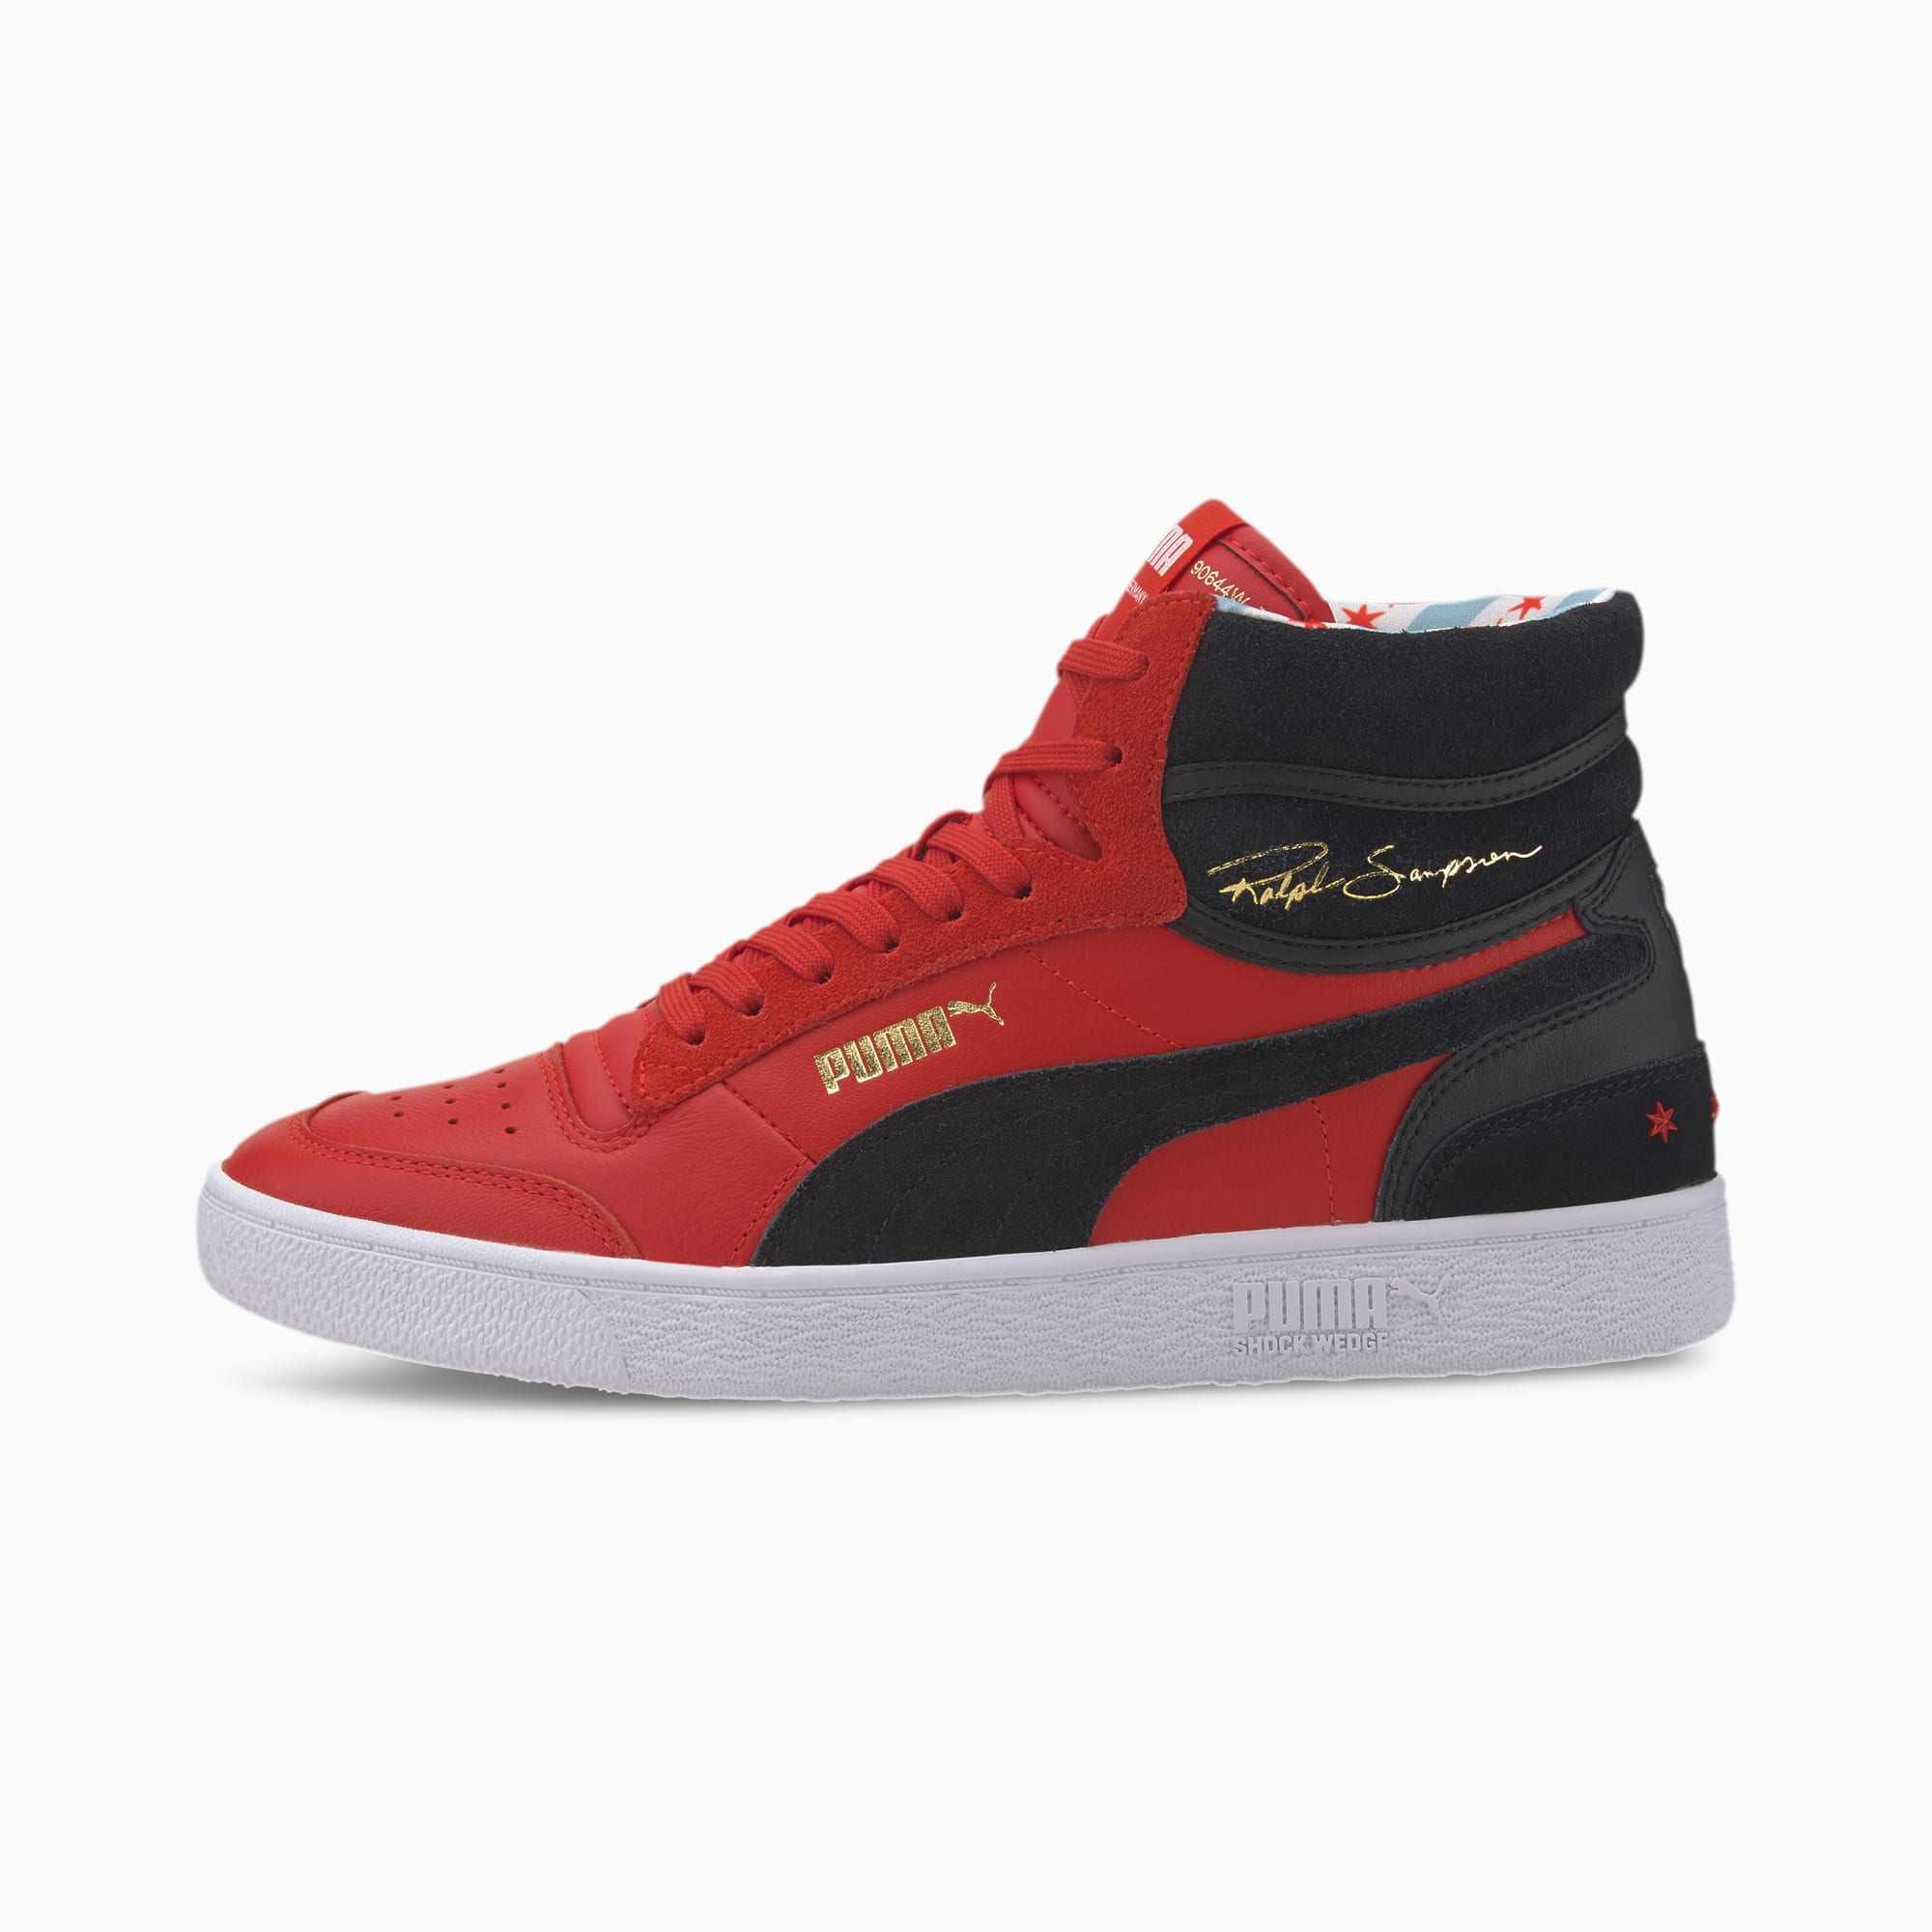 all red puma sneakers